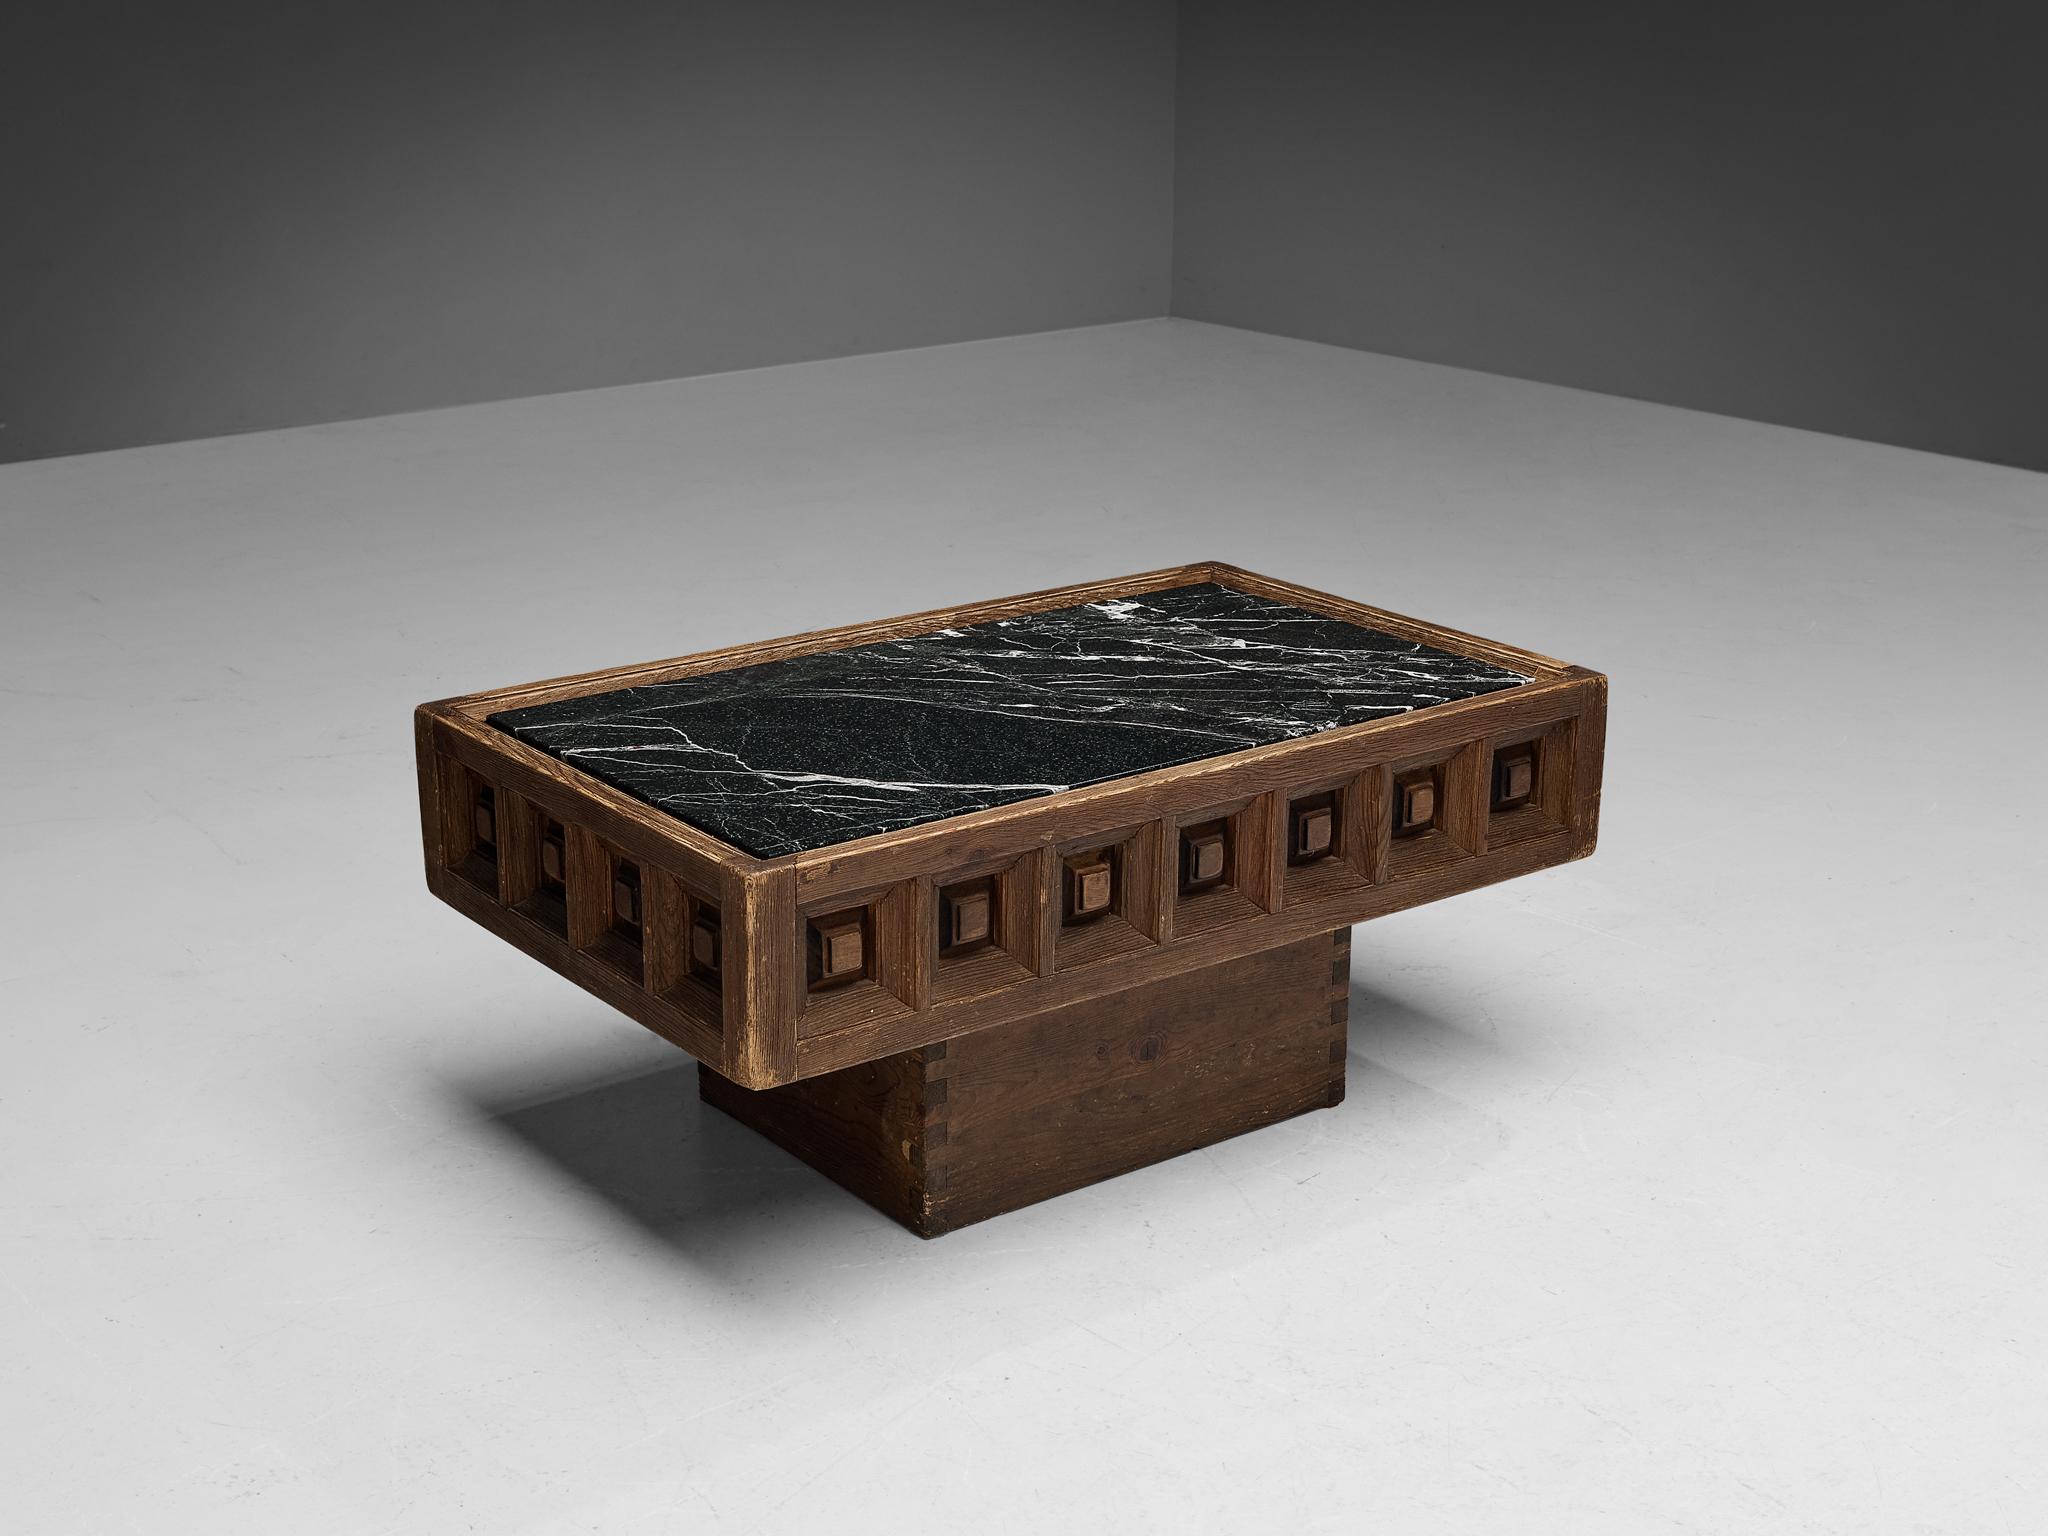 Biosca, coffee table, stained pine, Marquina marble, Spain, 1960s.

Outstanding Spanish coffee table that is executed by Biosca in an architectural way. The tabletop features a relief border of carved squares, giving the table a graphic texture.